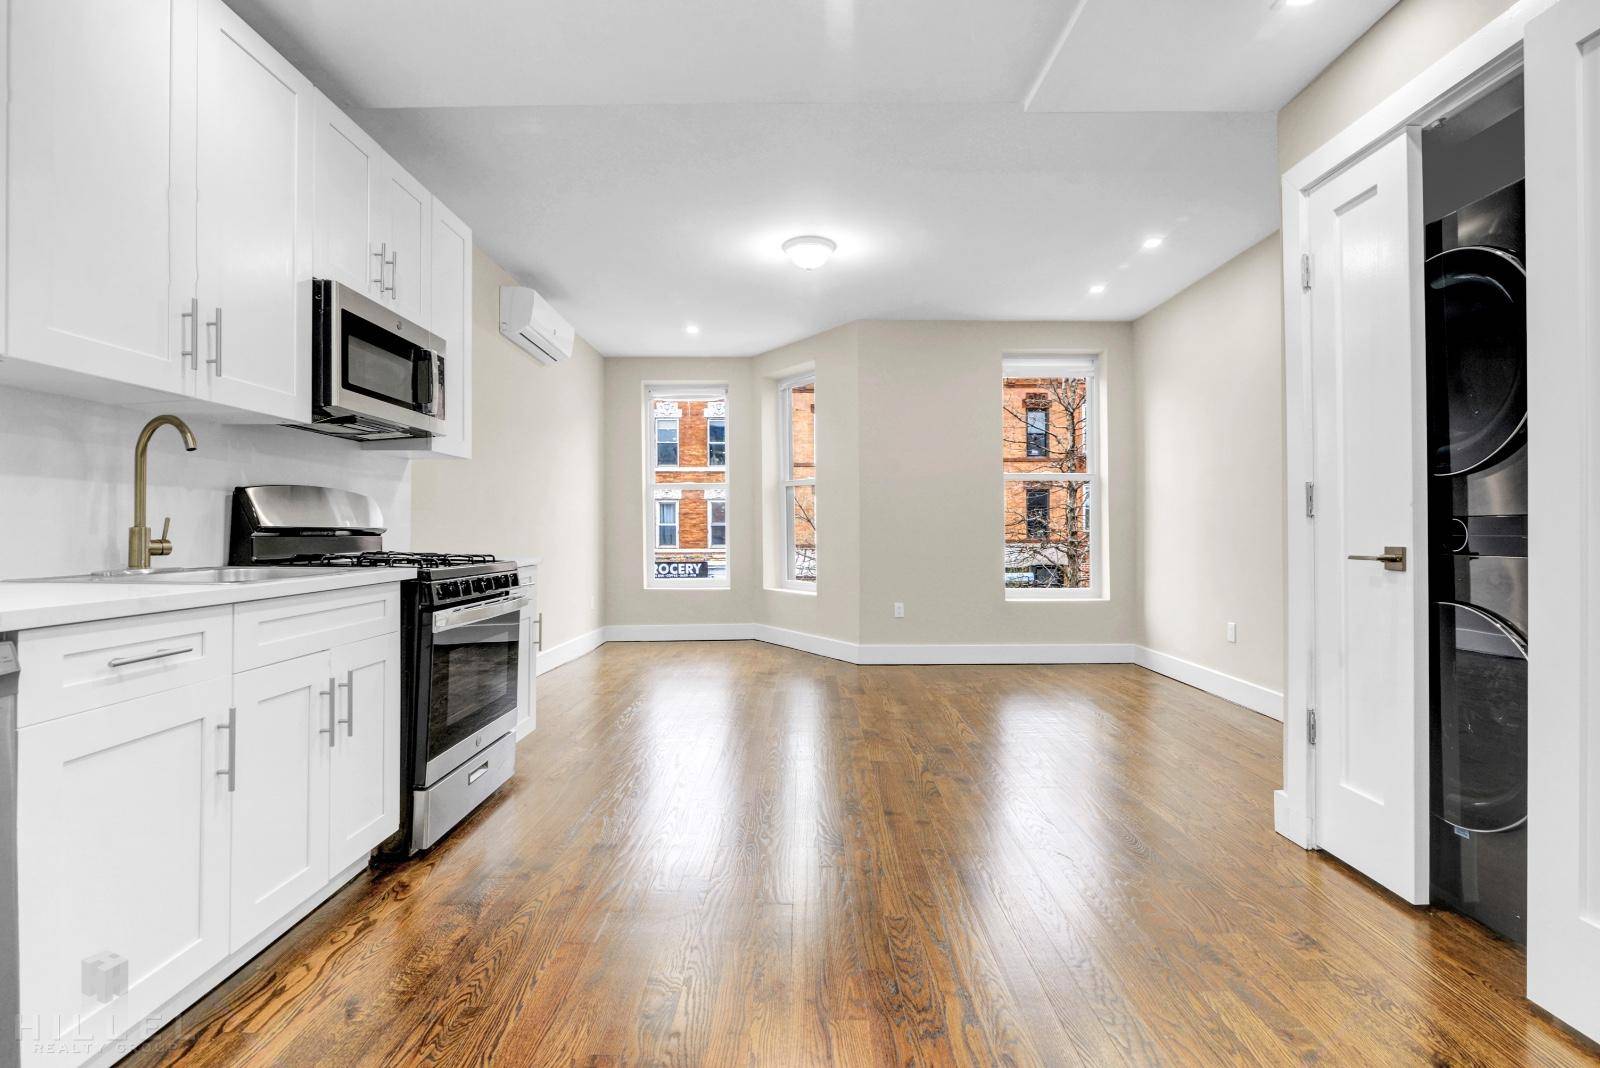 Welcome to 58 Rockaway Avenue, a beautiful renovated, sun drenched 2 Family town home located in Ocean Hill.